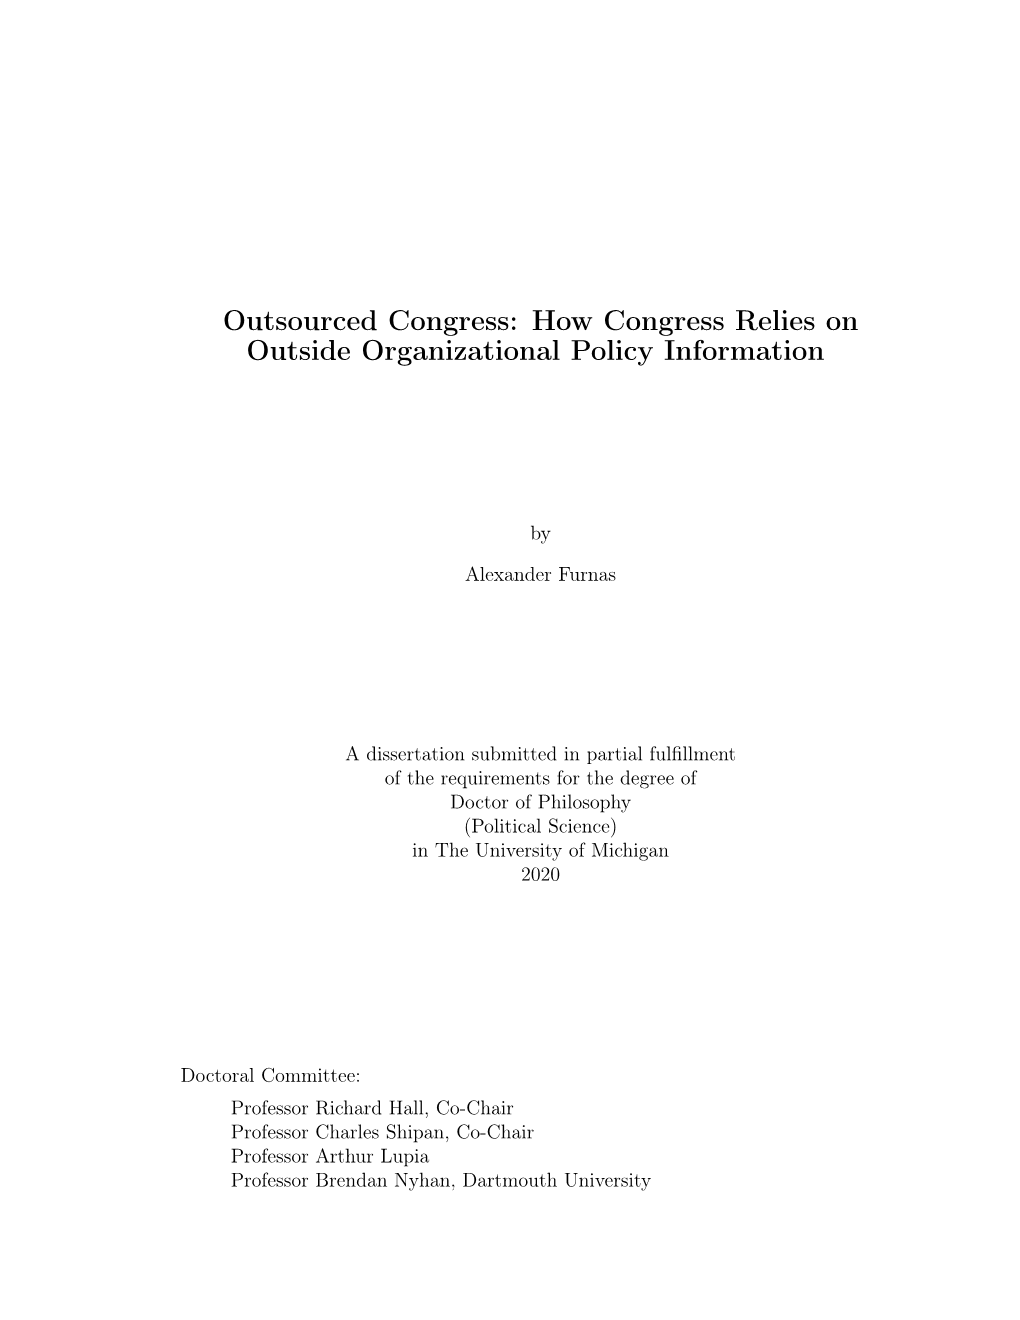 Outsourced Congress: How Congress Relies on Outside Organizational Policy Information